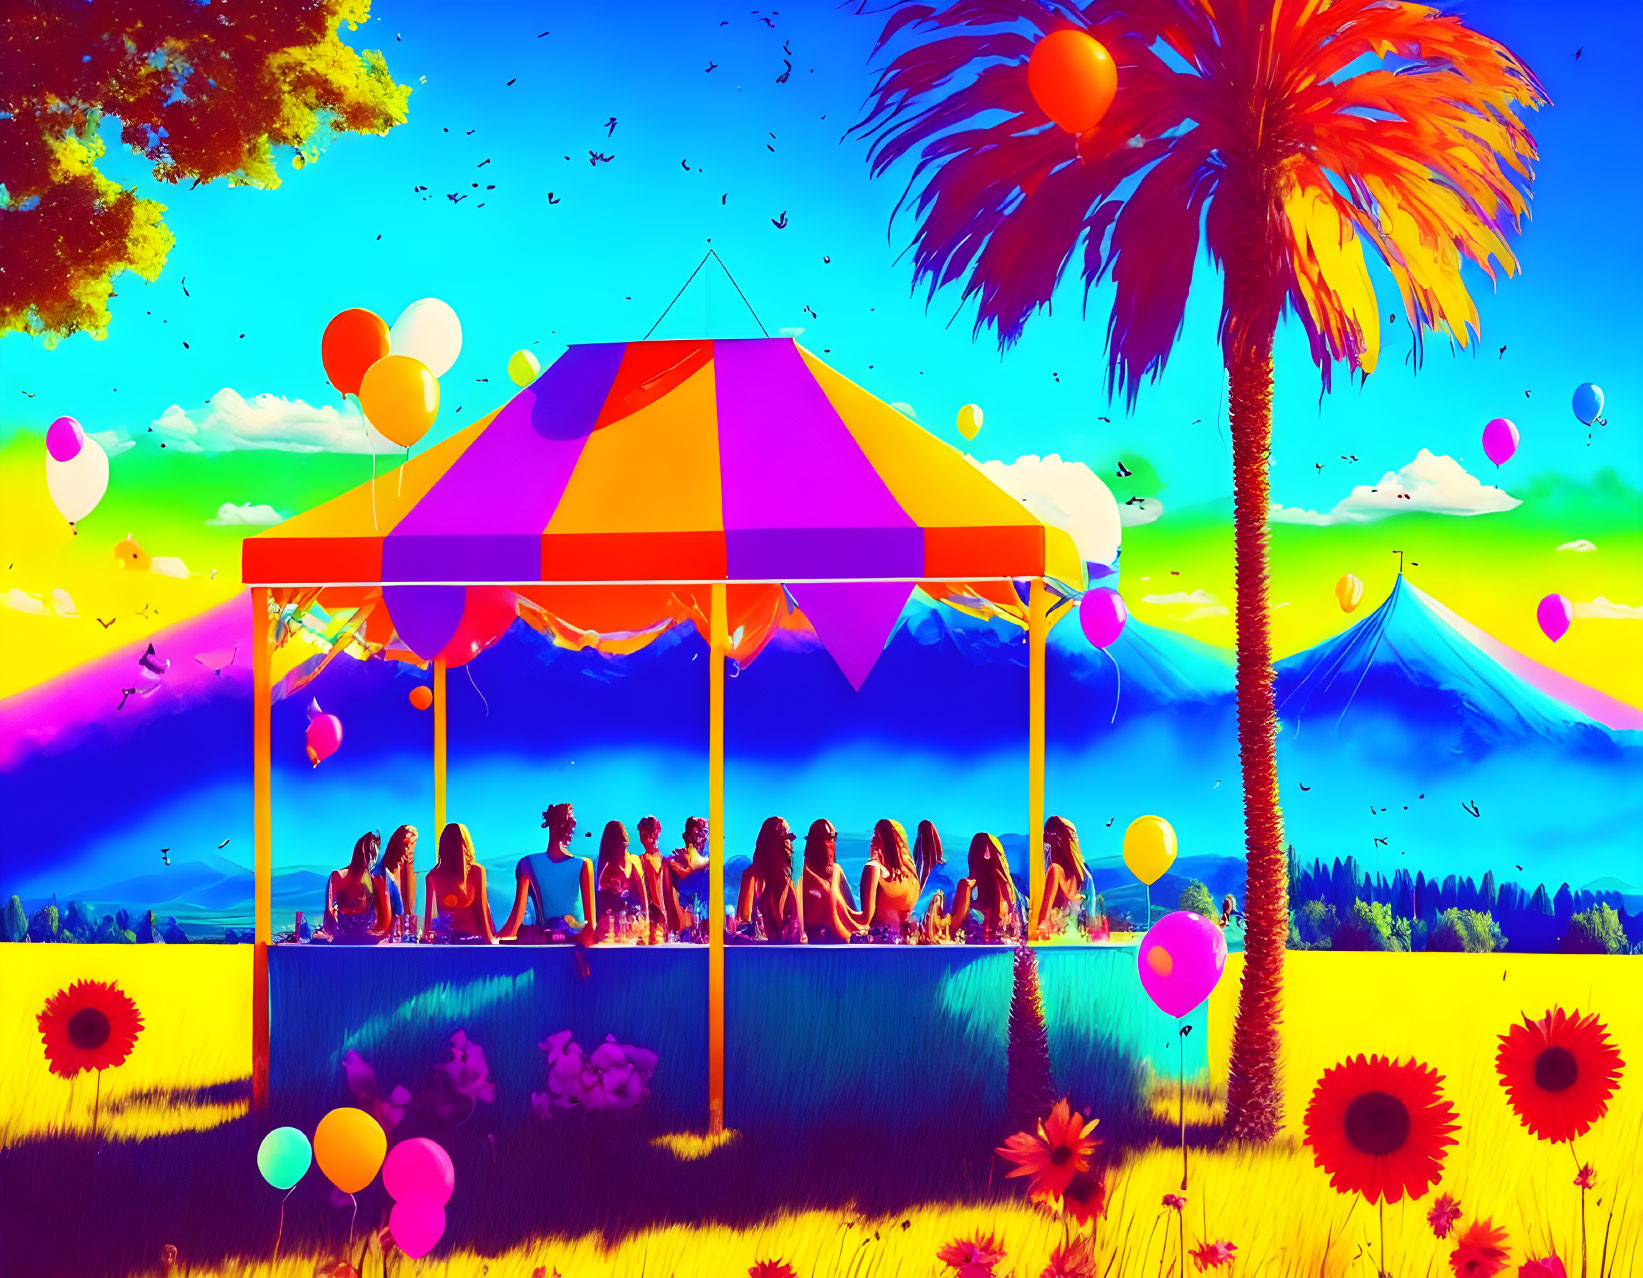 Colorful surreal artwork featuring people under tent, mountains, sunflowers, palm trees, and floating balloons